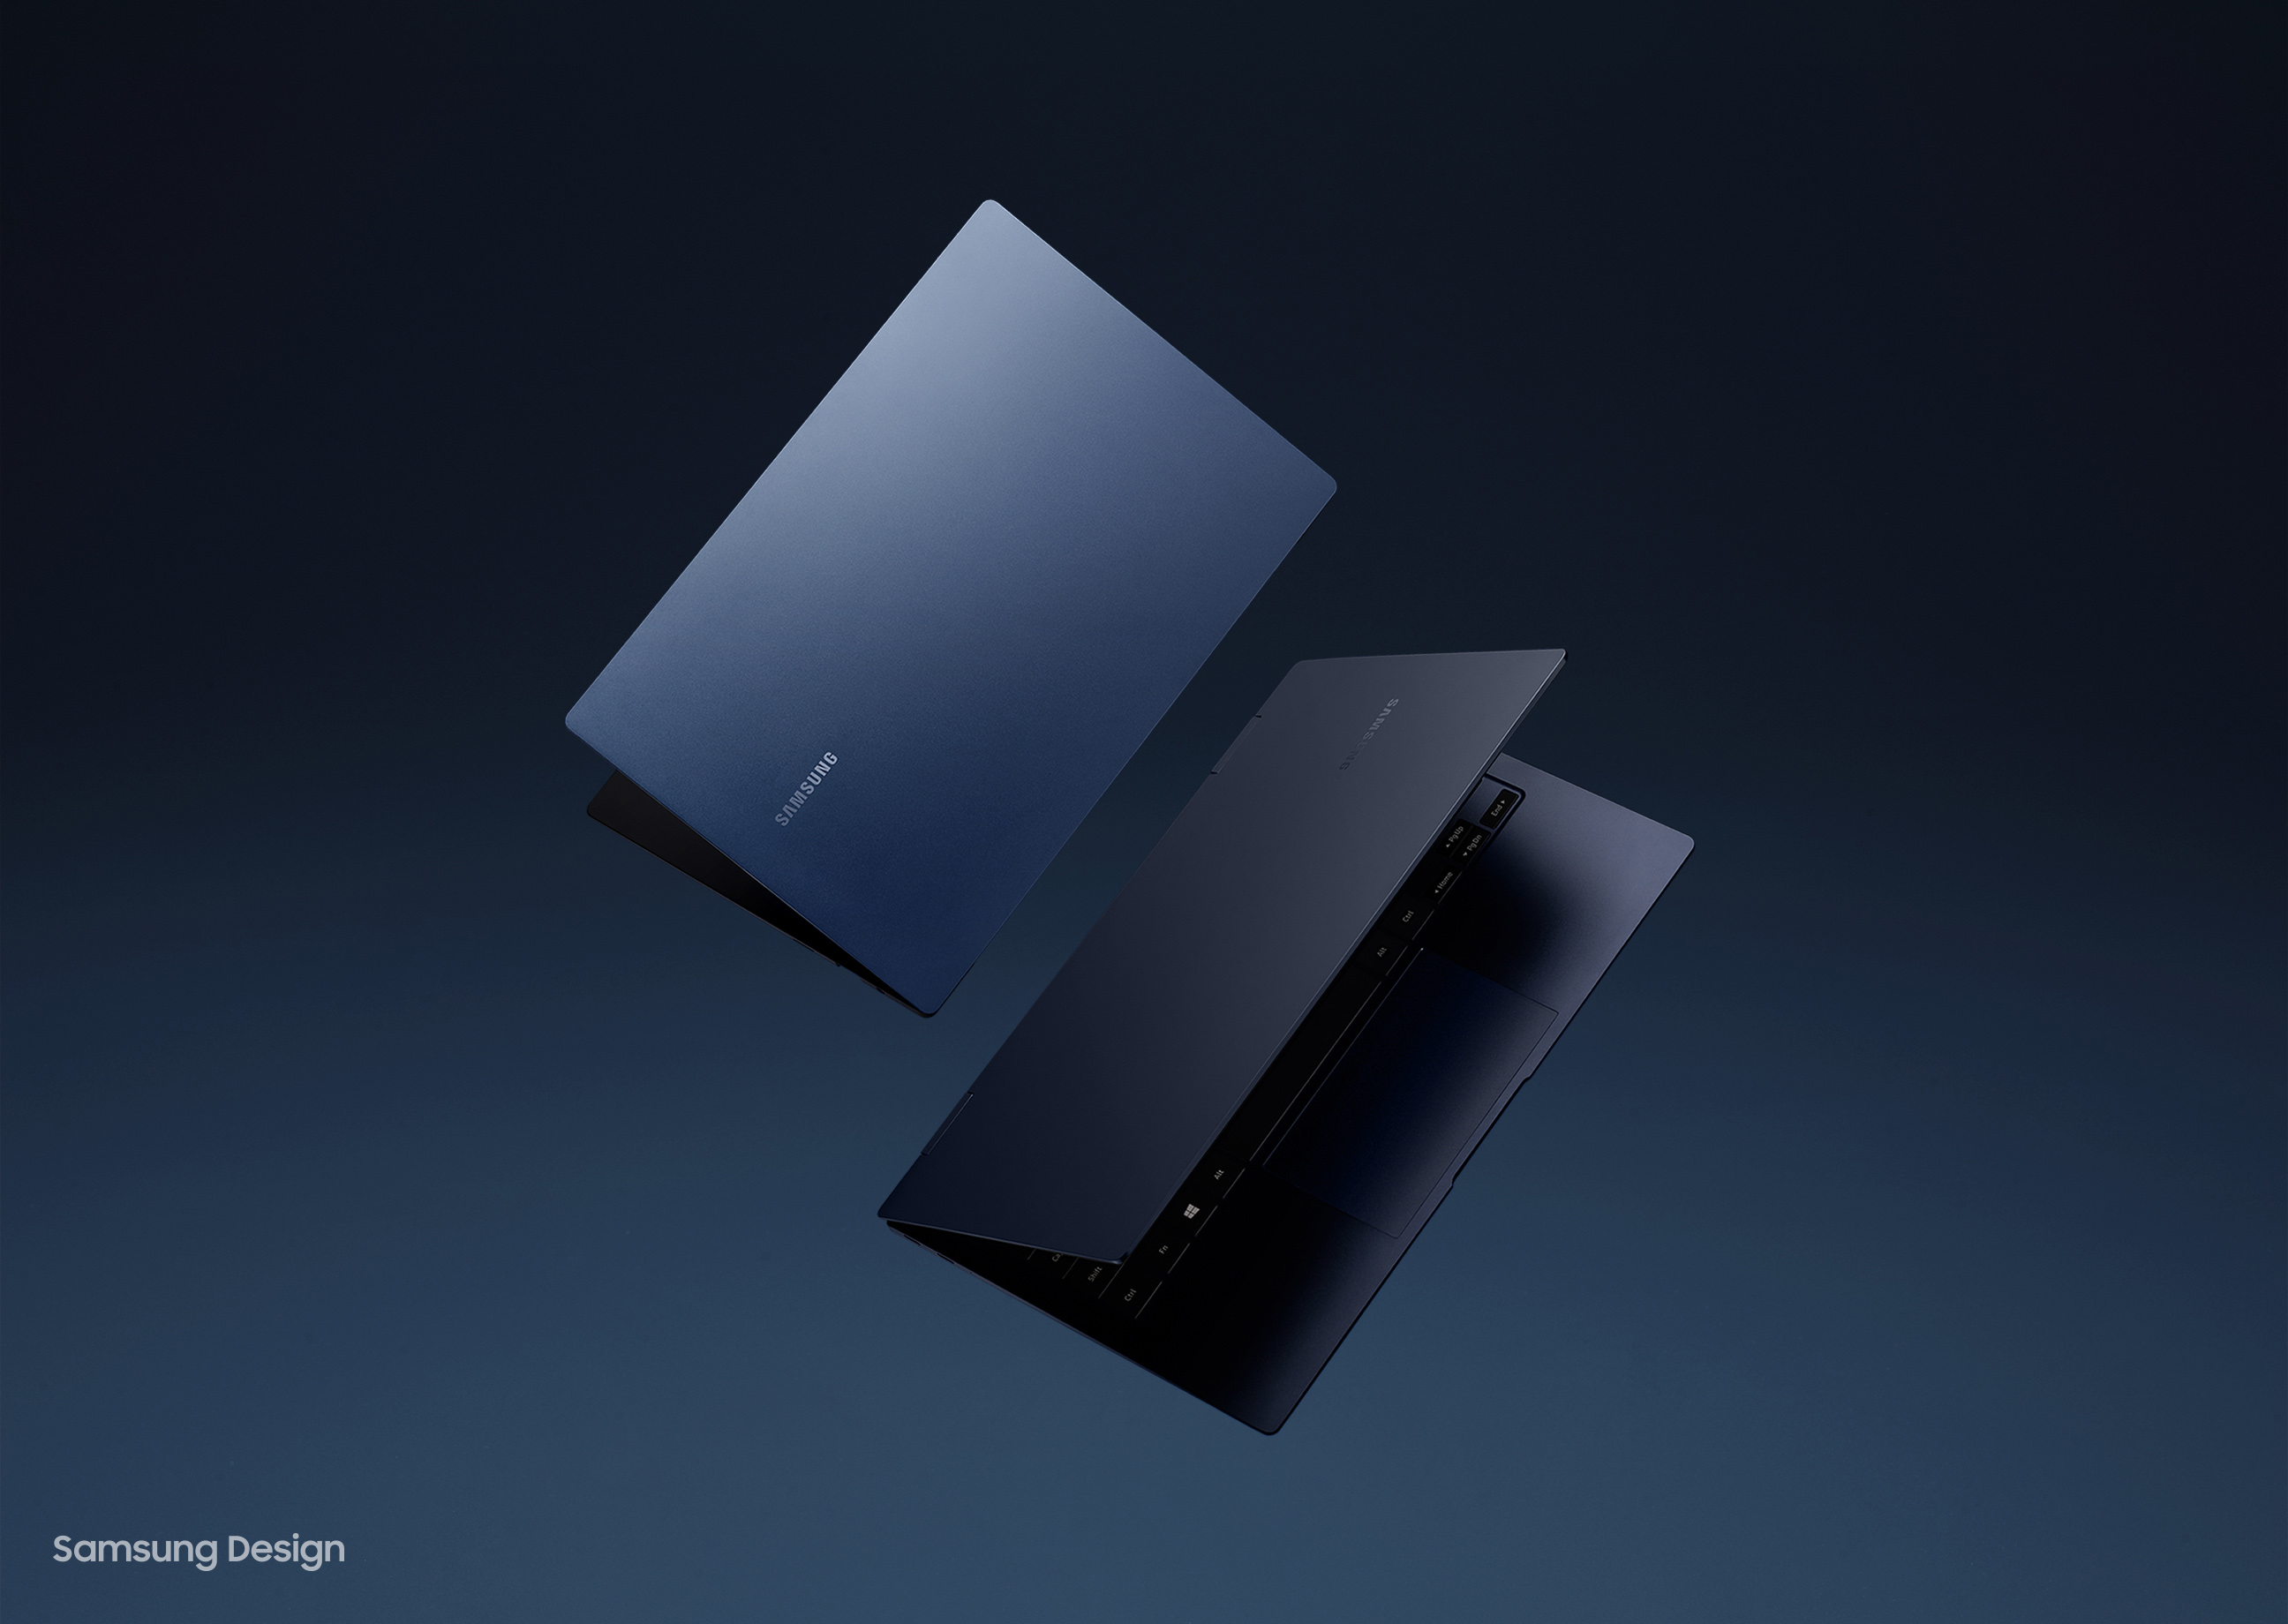 Galaxy Book Pro and Galaxy Book Pro 360 Design Story